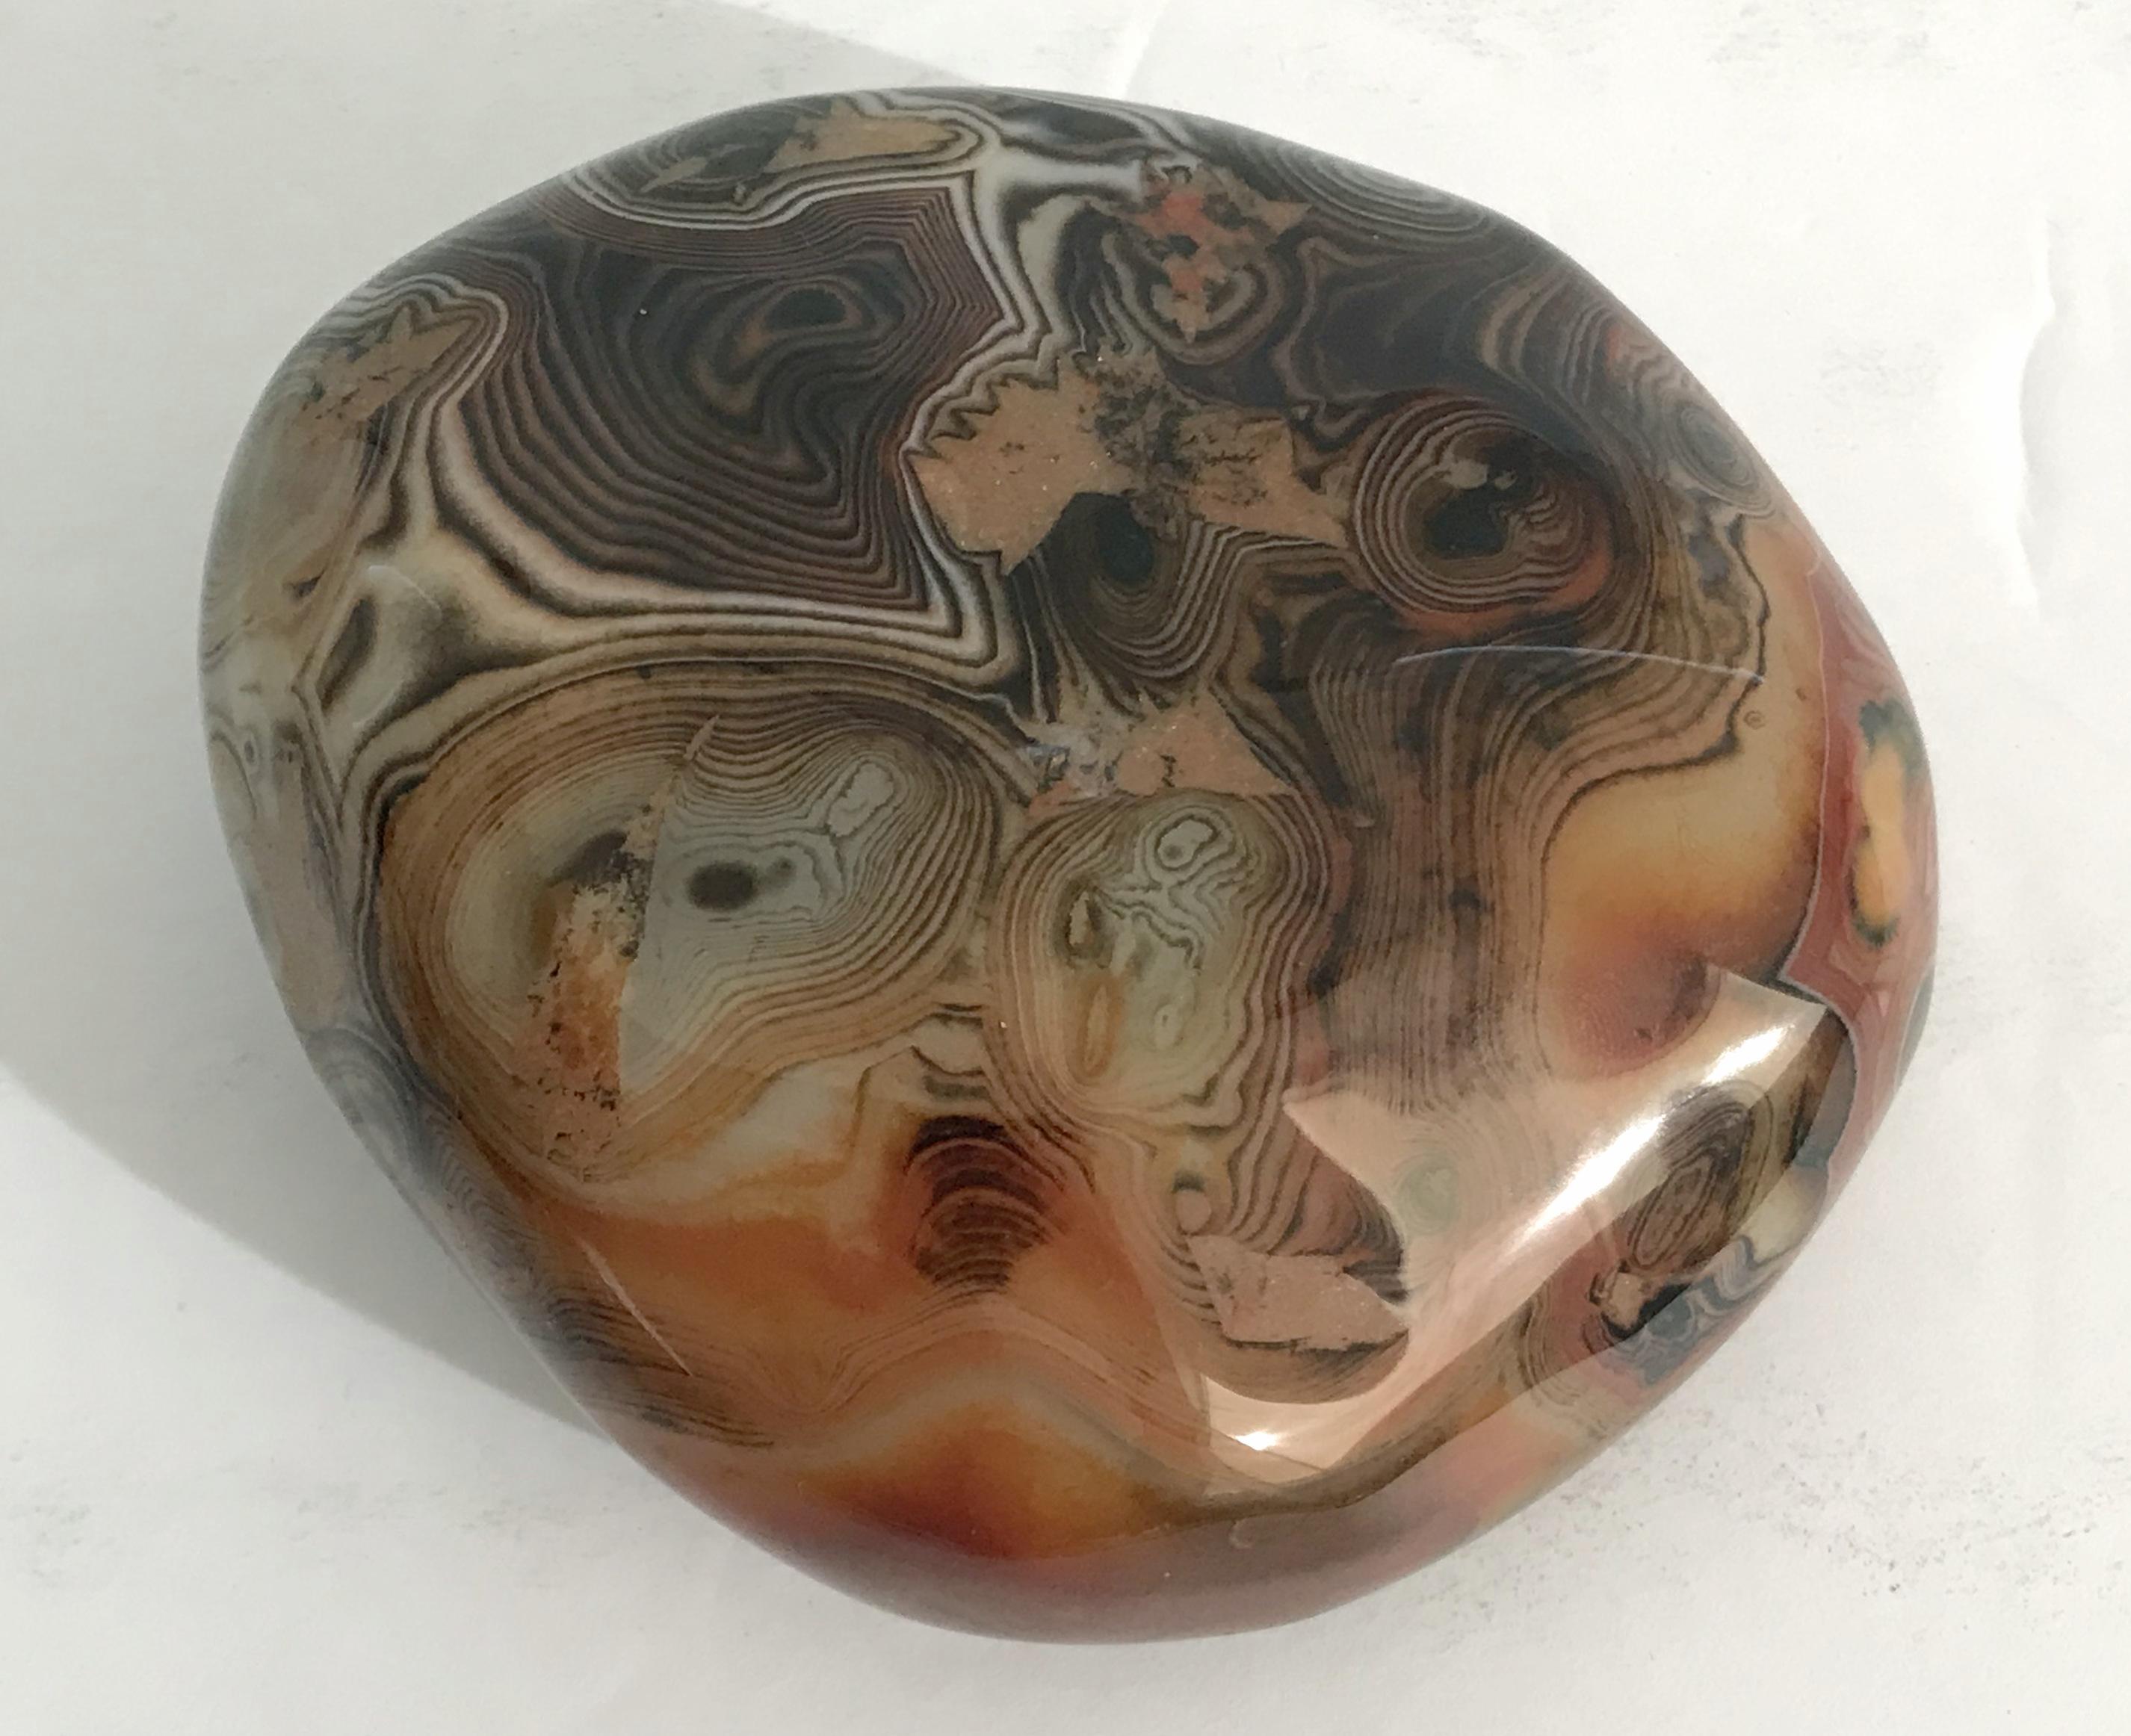 Hand polished agate onyx stone paperweight in black, brown, and red intricate layered patterns
Measures: length 4.25 inches, width 3.25 inches, height 2 inches
1 in stock in Palm Springs ON 50% OFF SALE for $225 !!
This piece makes for a great and